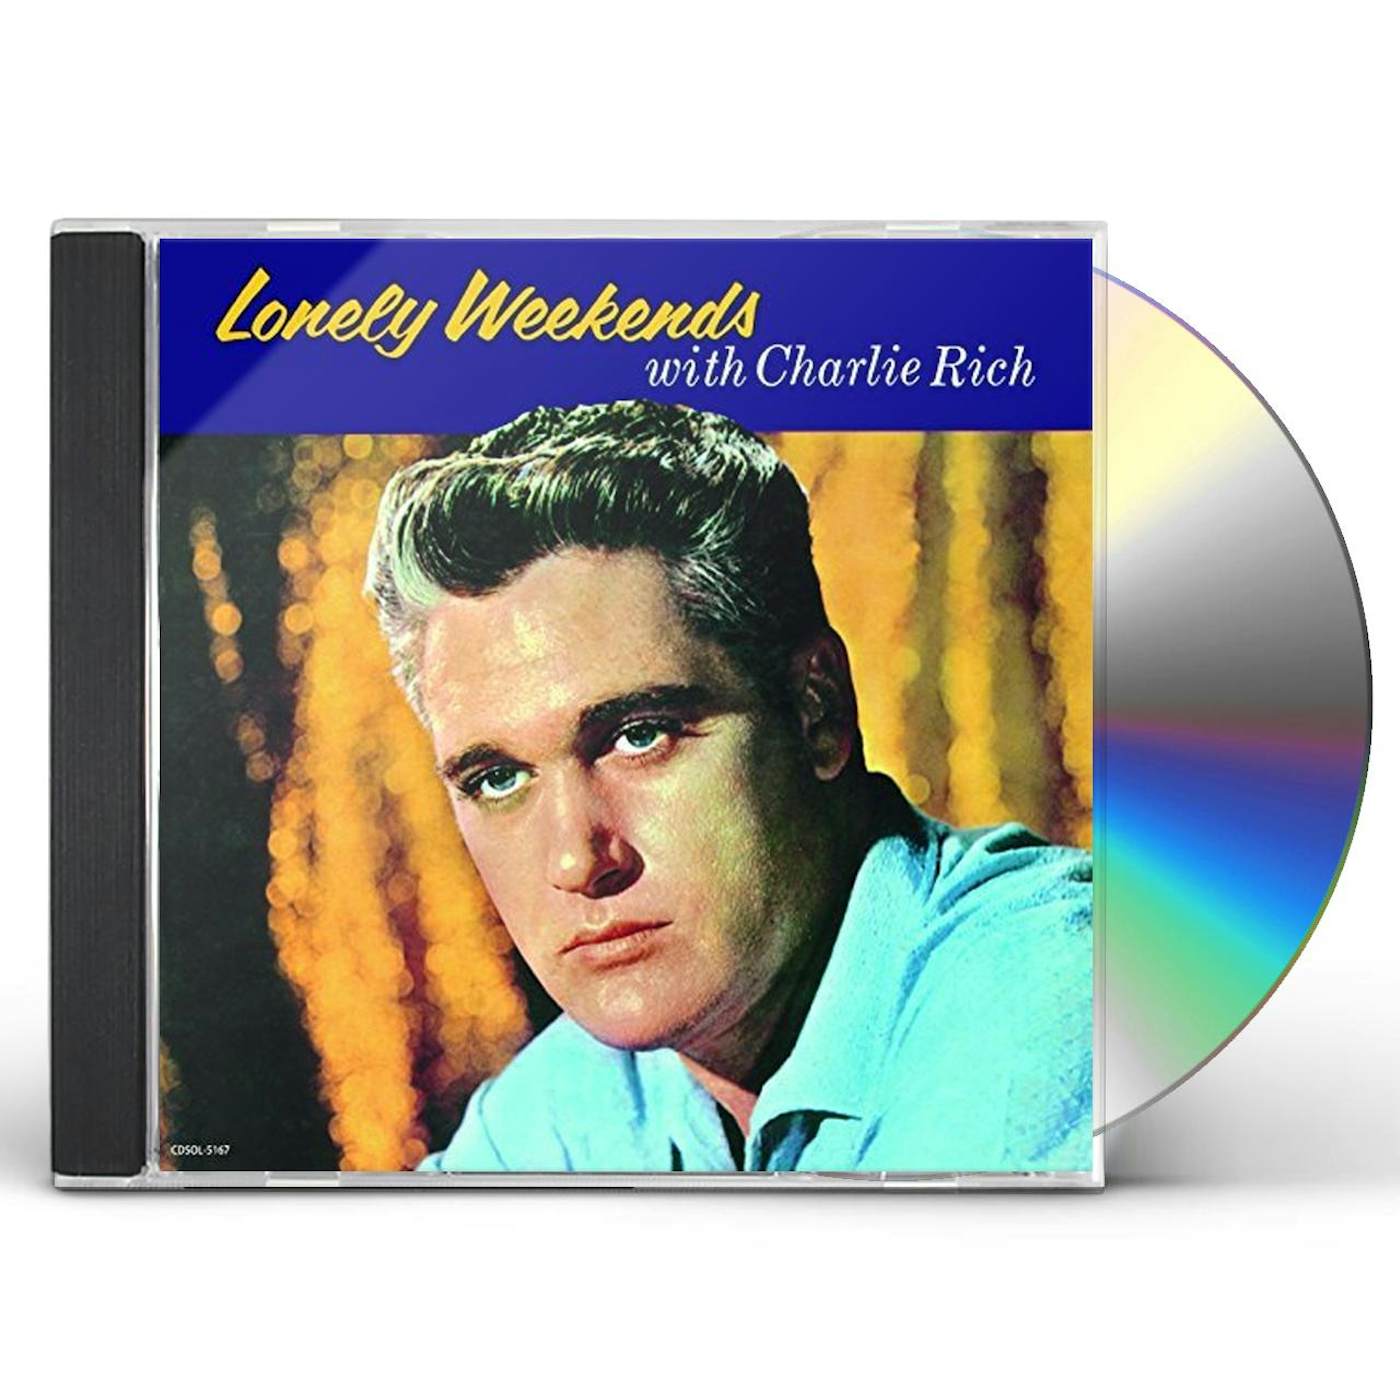 LONELY WEEKENDS WITH CHARLIE RICH CD